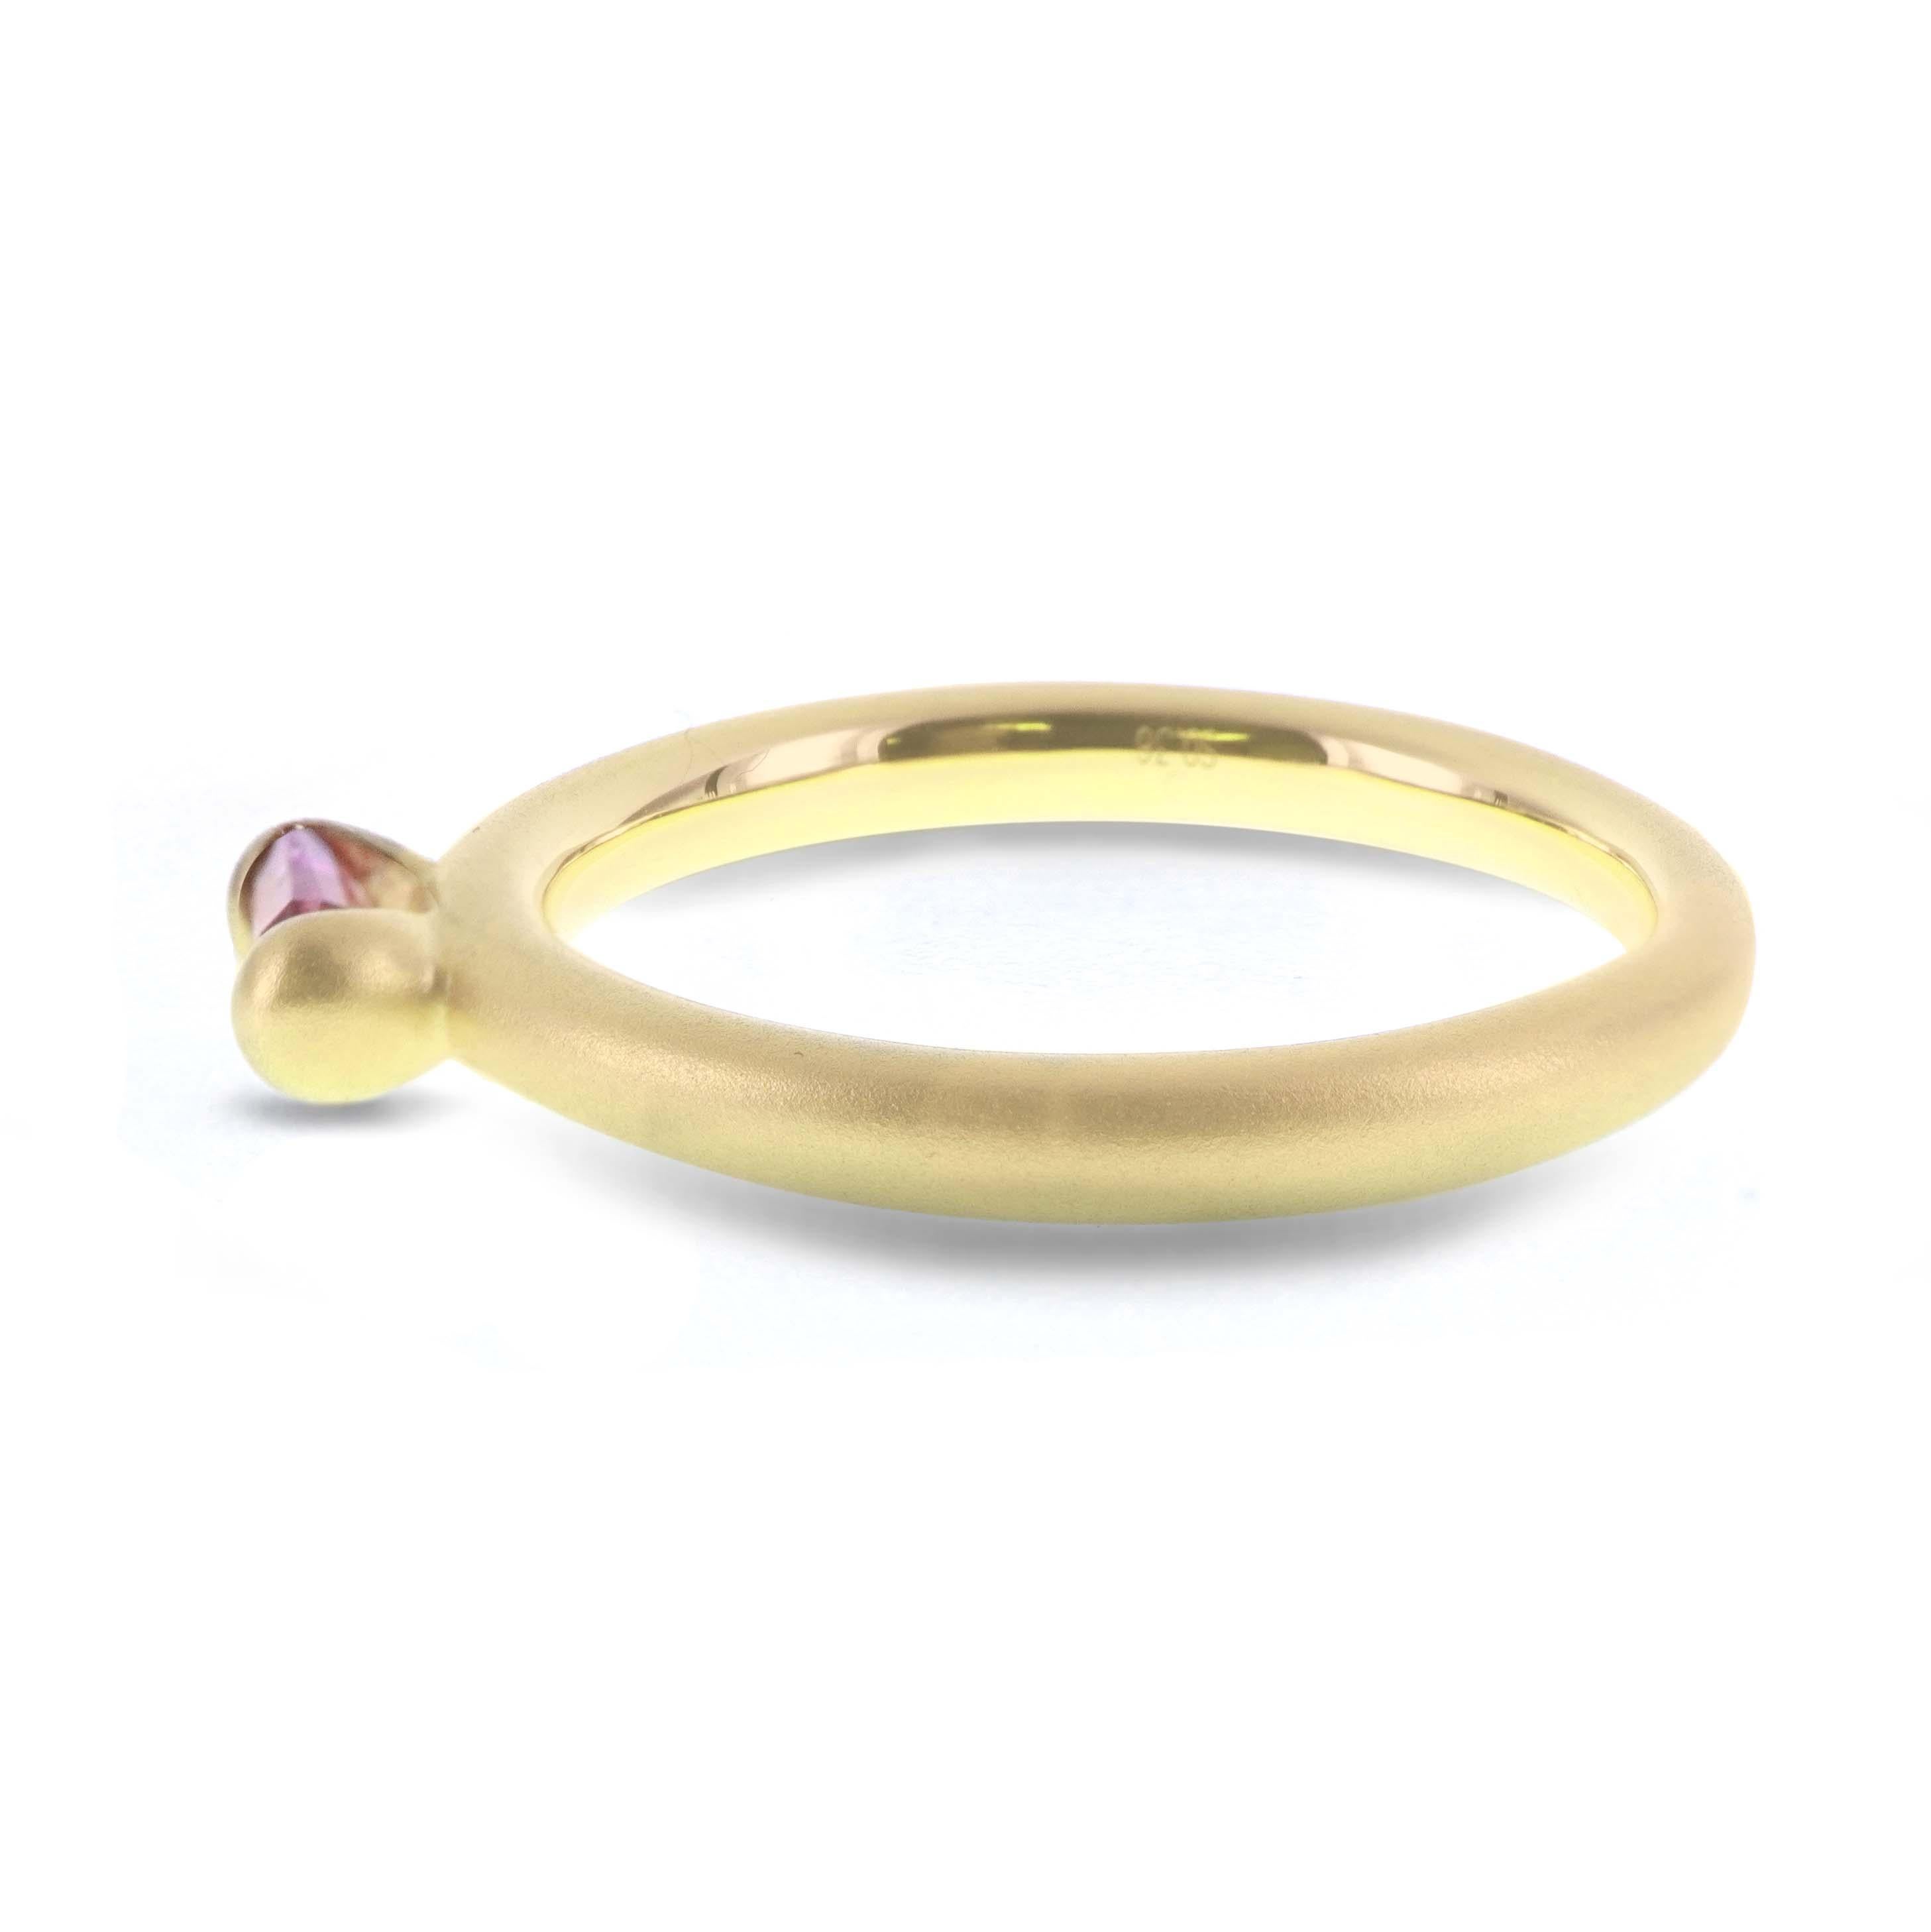 0.37 carat of super saturated hot pink sapphire is set in this 18K matt finish gold ring. The ring is hand made in Hong Kong and the gold weighs 3.31 grams. The ring can be worn as a trio ring or can be worn individually. 